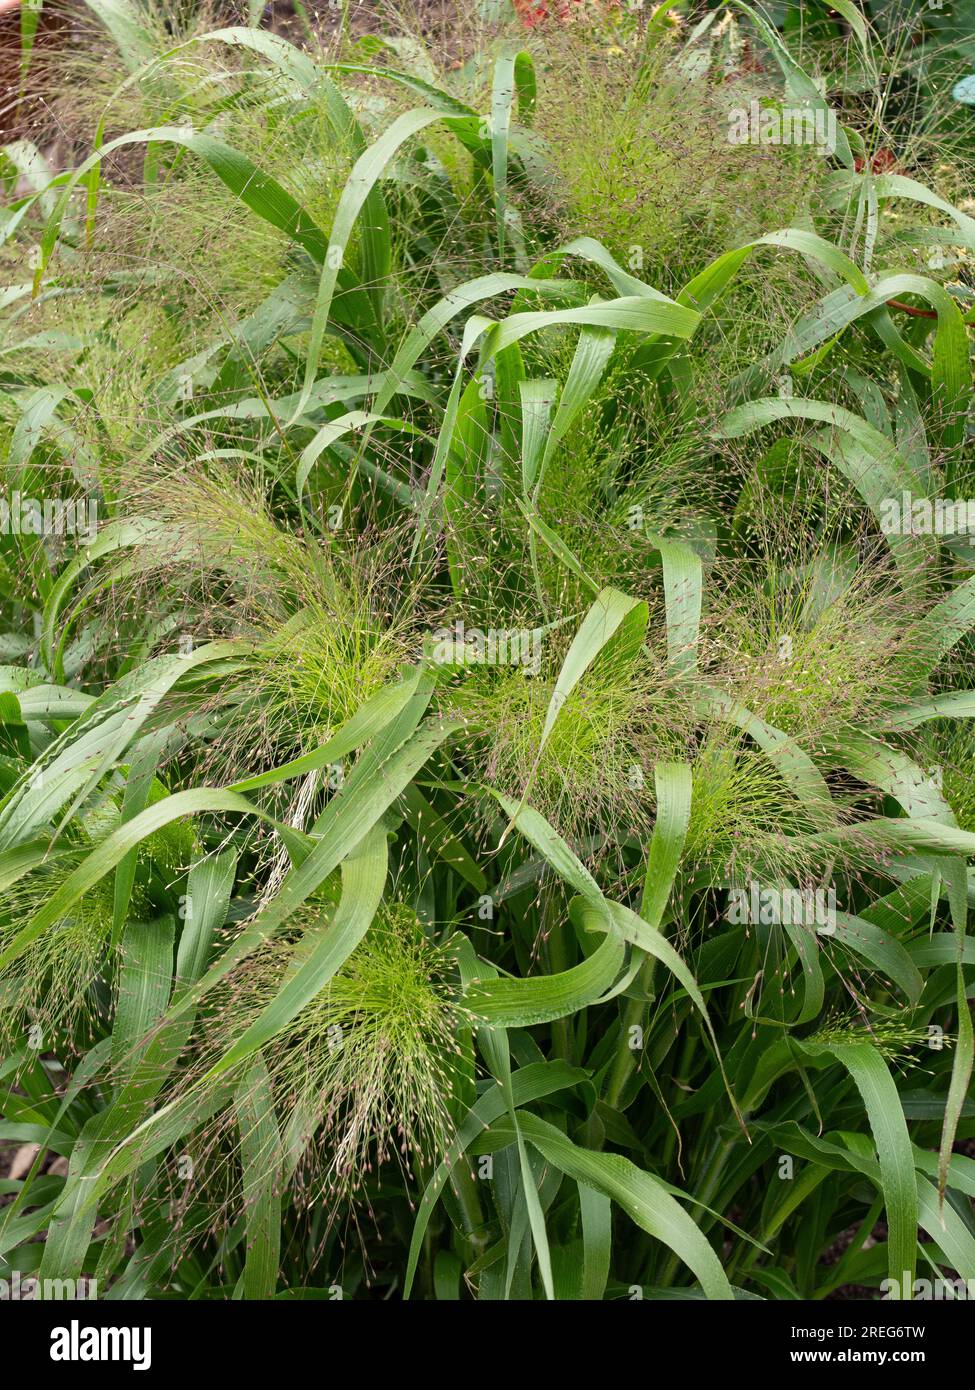 The airy delicate flower heads and lush green leaves of the grass Panicum elegans 'Spinkles' Stock Photo